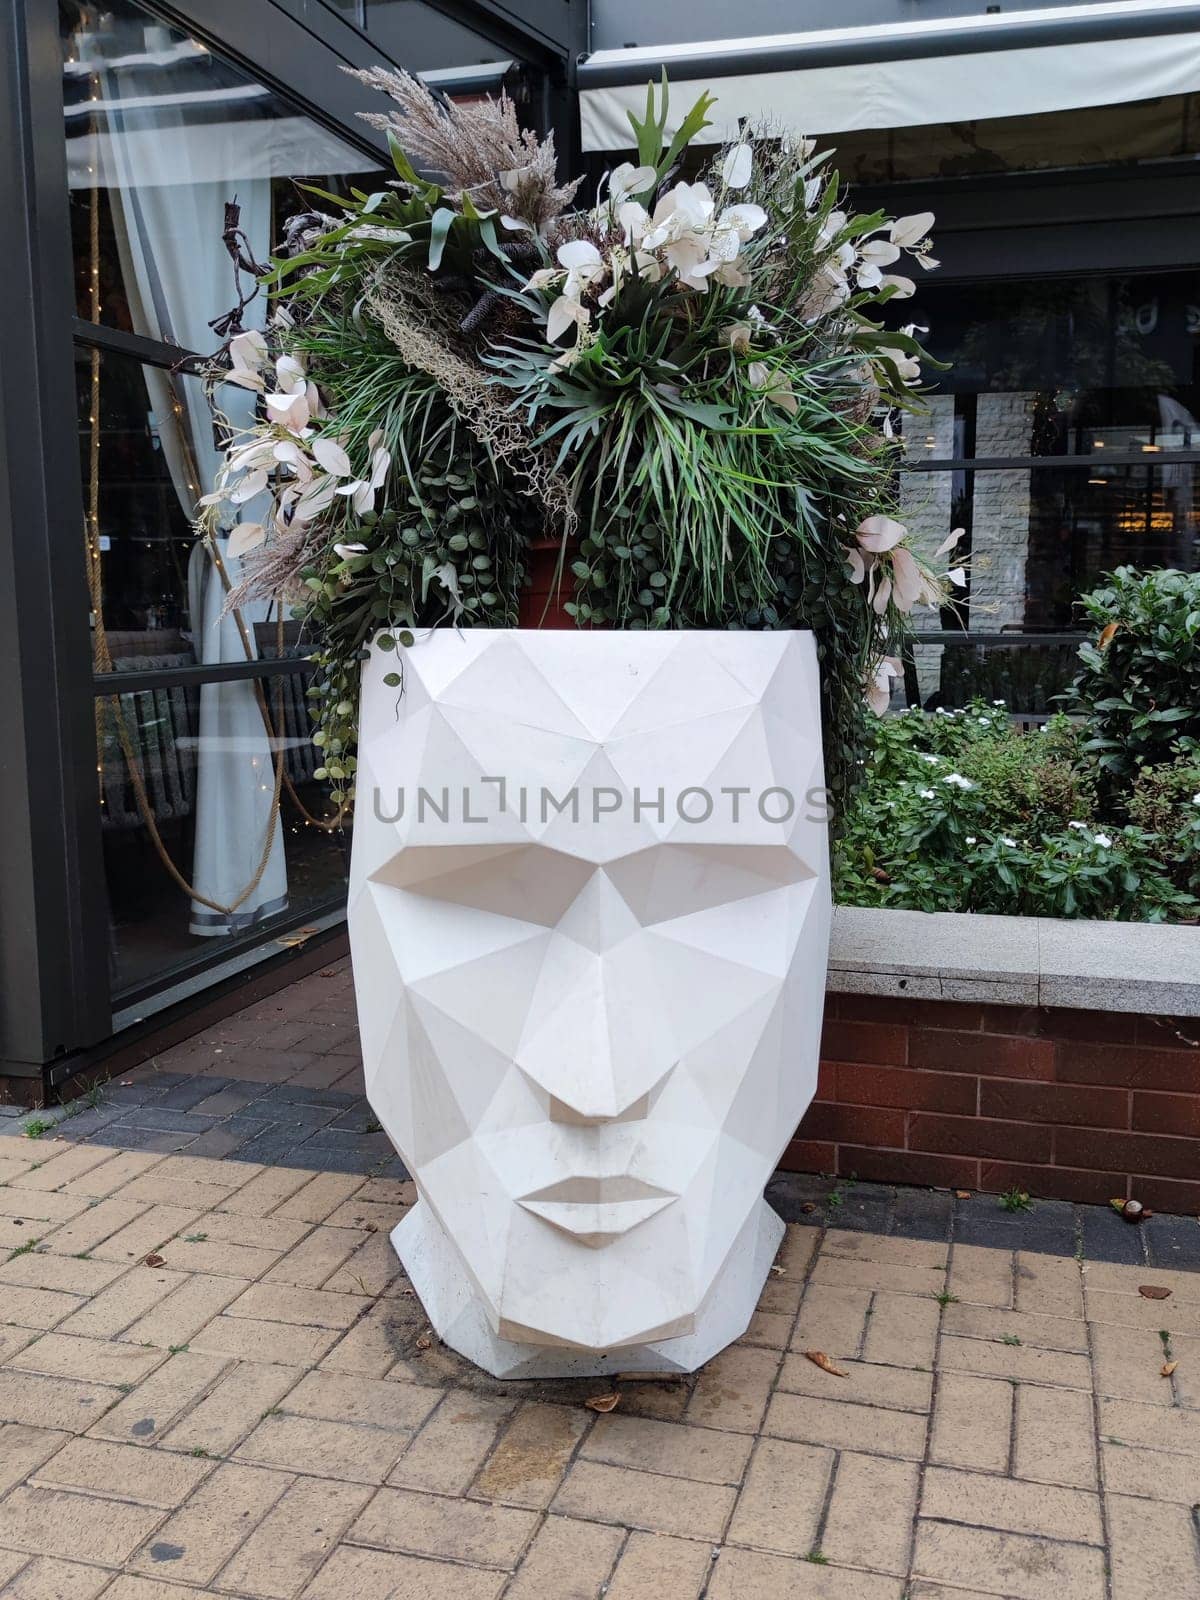 creative outdoor planter in the shape of a human head with flowers instead of hair by Annado